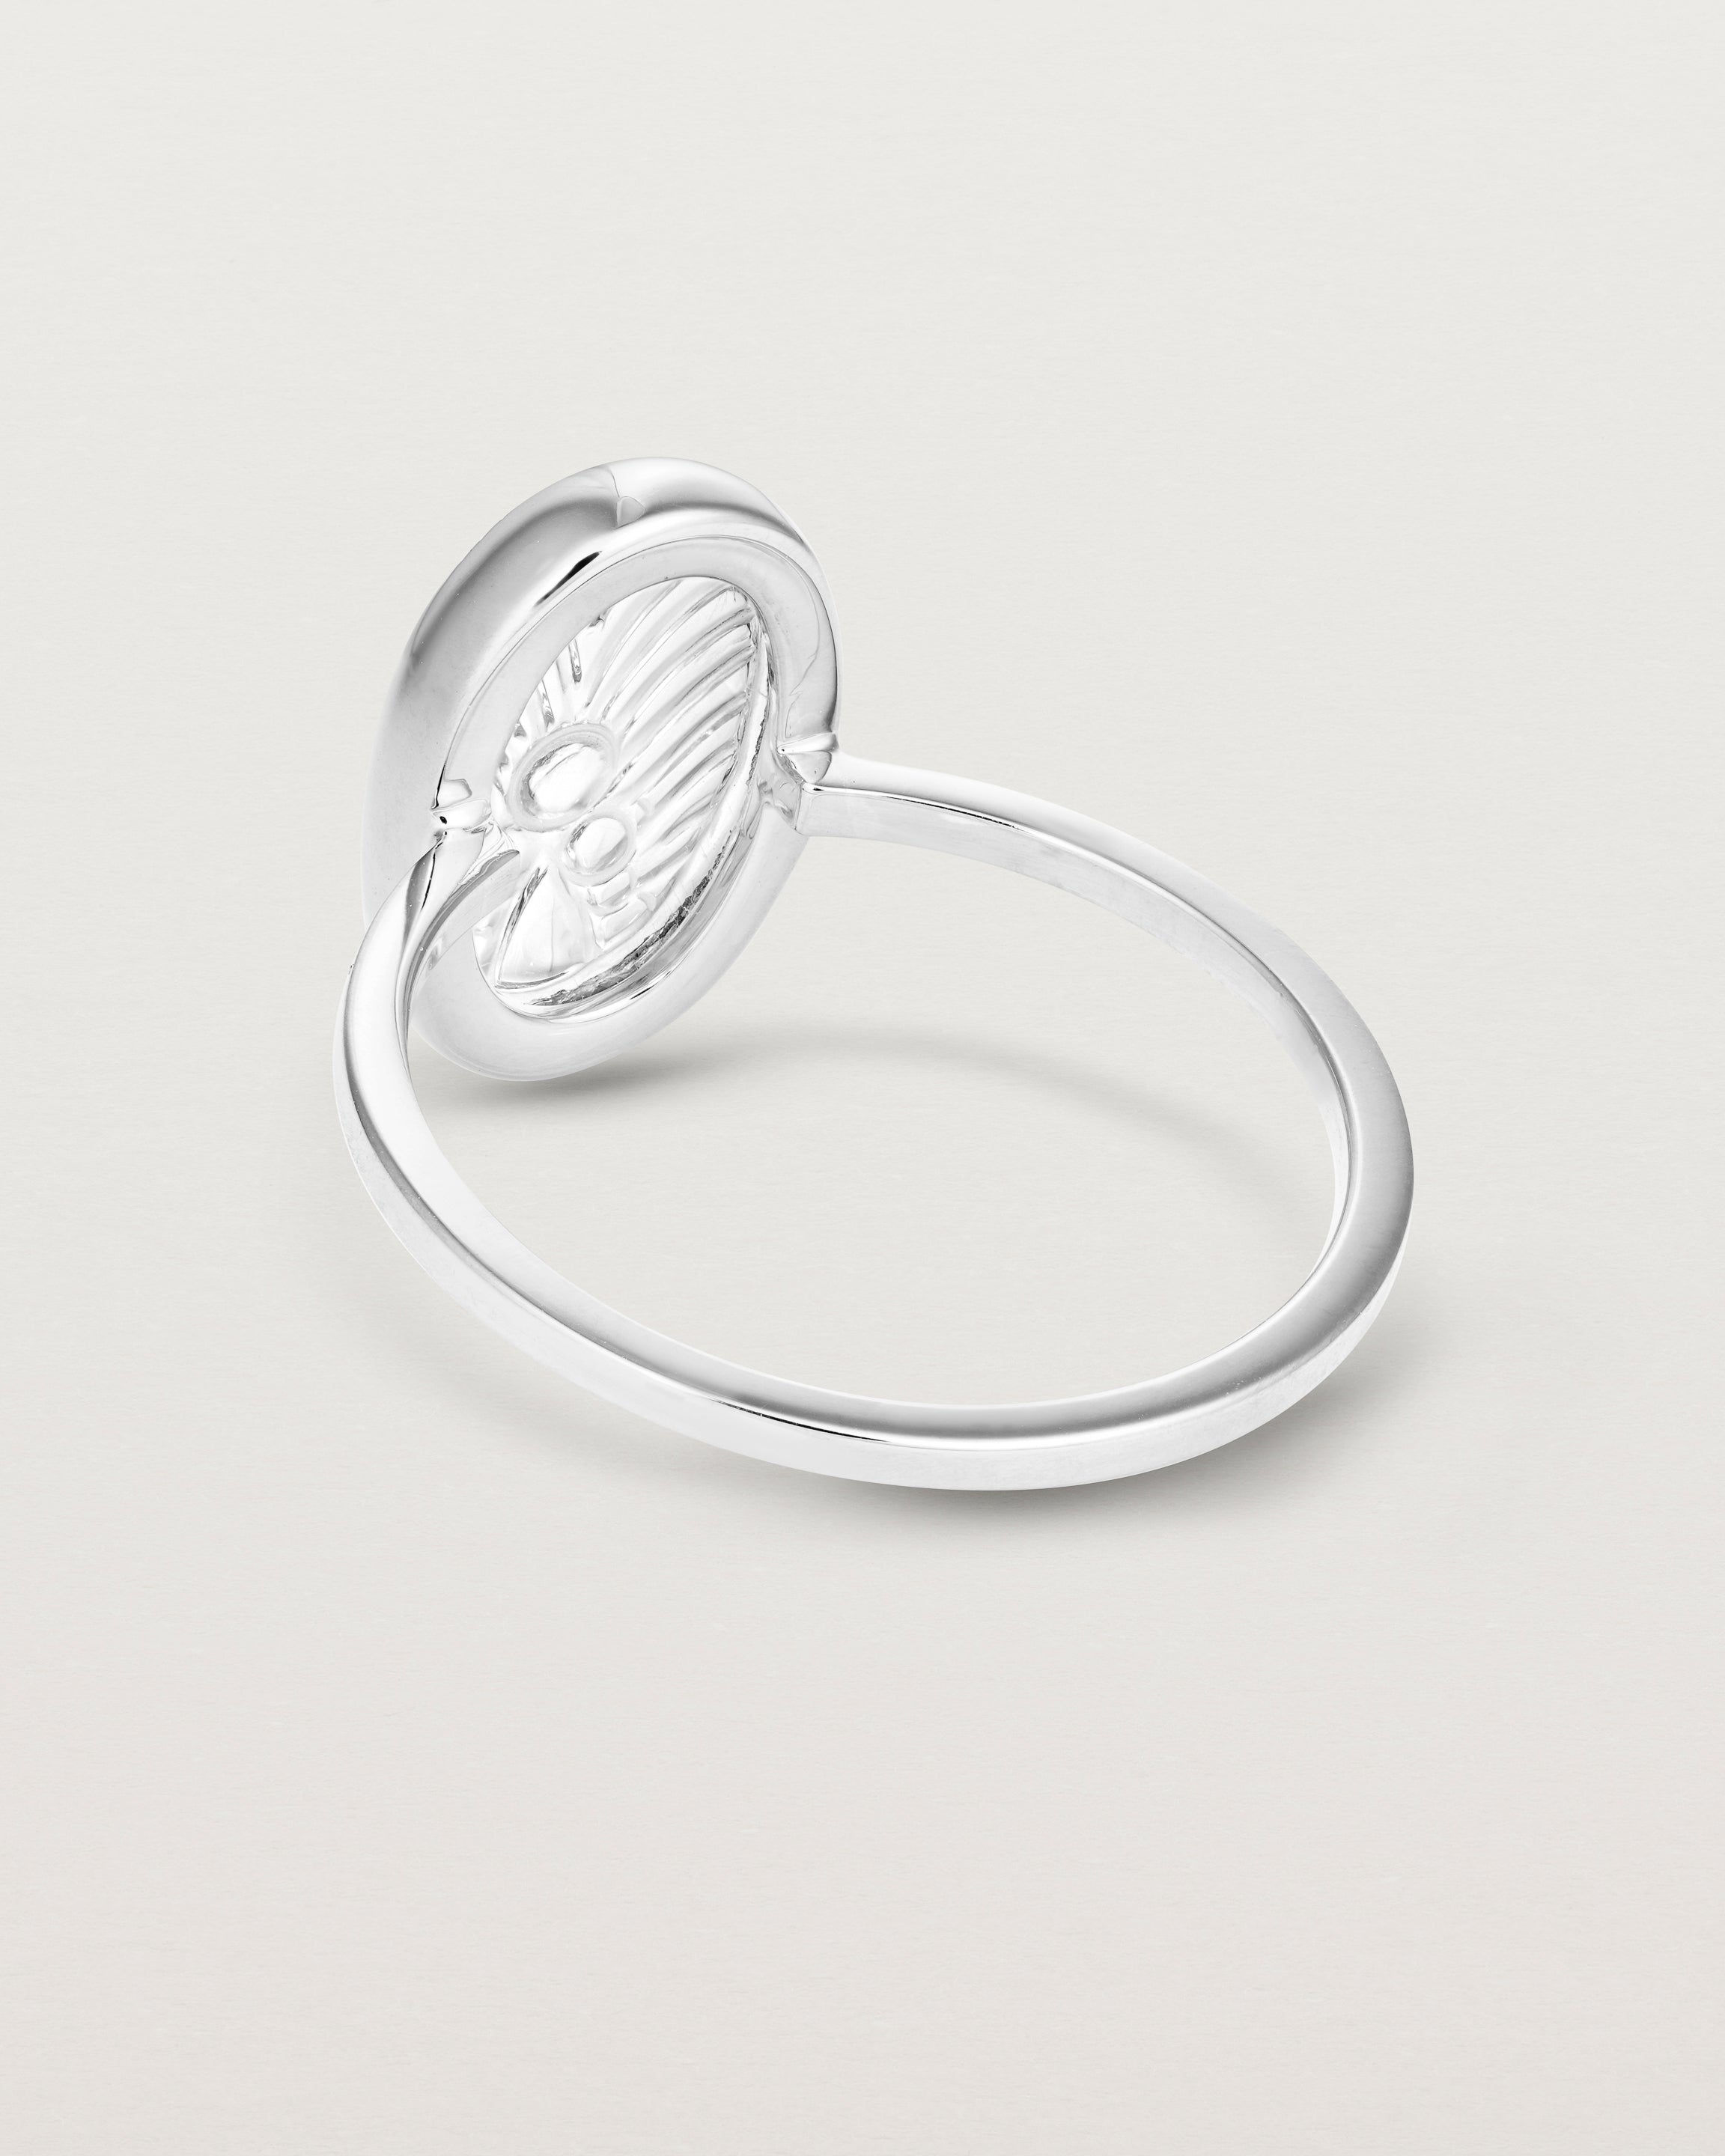 Back view of the Ruan Ring | Carved Quartz in sterling silver.